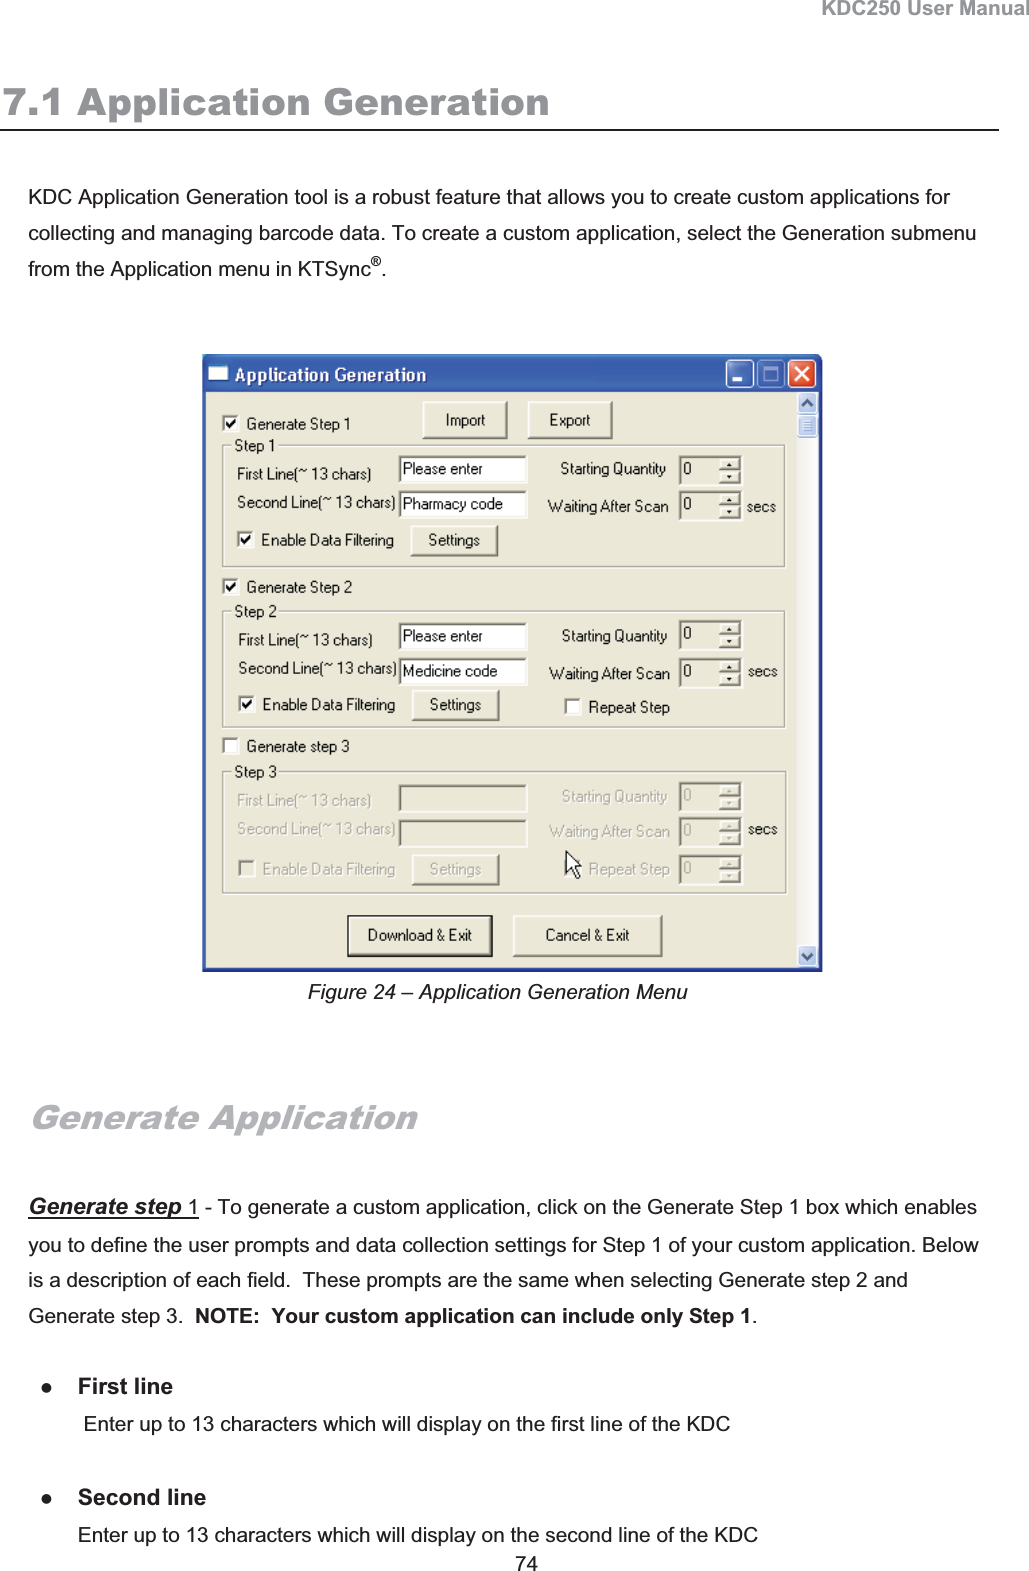 KDC250 User Manual 74 7.1 Application GenerationKDC Application Generation tool is a robust feature that allows you to create custom applications for collecting and managing barcode data. To create a custom application, select the Generation submenu from the Application menu in KTSync®.Generate Application Generate step 1 - To generate a custom application, click on the Generate Step 1 box which enables you to define the user prompts and data collection settings for Step 1 of your custom application. Below is a description of each field.  These prompts are the same when selecting Generate step 2 and Generate step 3.  NOTE:  Your custom application can include only Step 1.    zFirst line  Enter up to 13 characters which will display on the first line of the KDC zSecond line Enter up to 13 characters which will display on the second line of the KDC Figure 24 – Application Generation Menu 